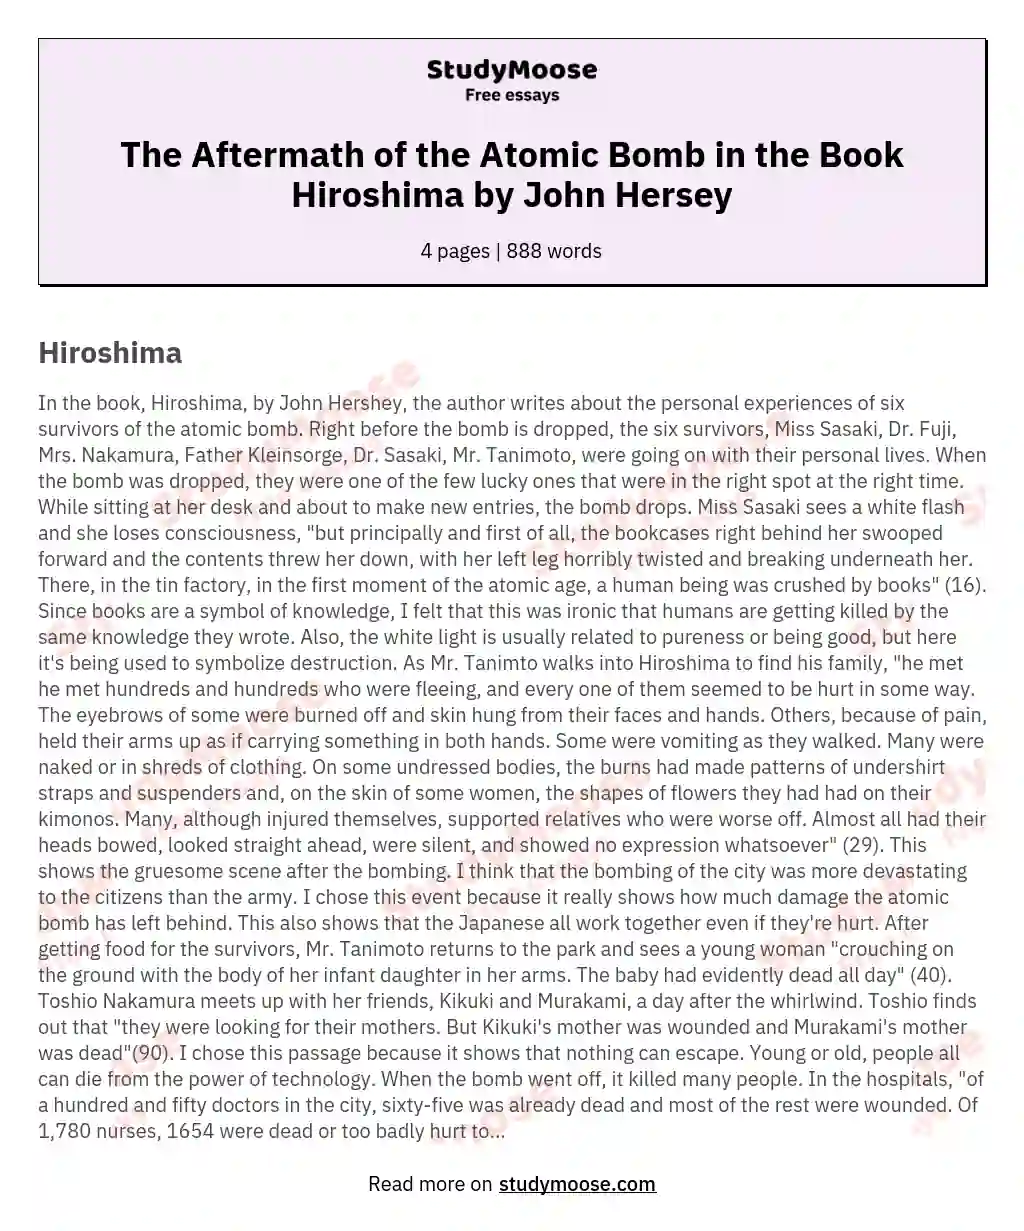 The Aftermath of the Atomic Bomb in the Book Hiroshima by John Hersey essay